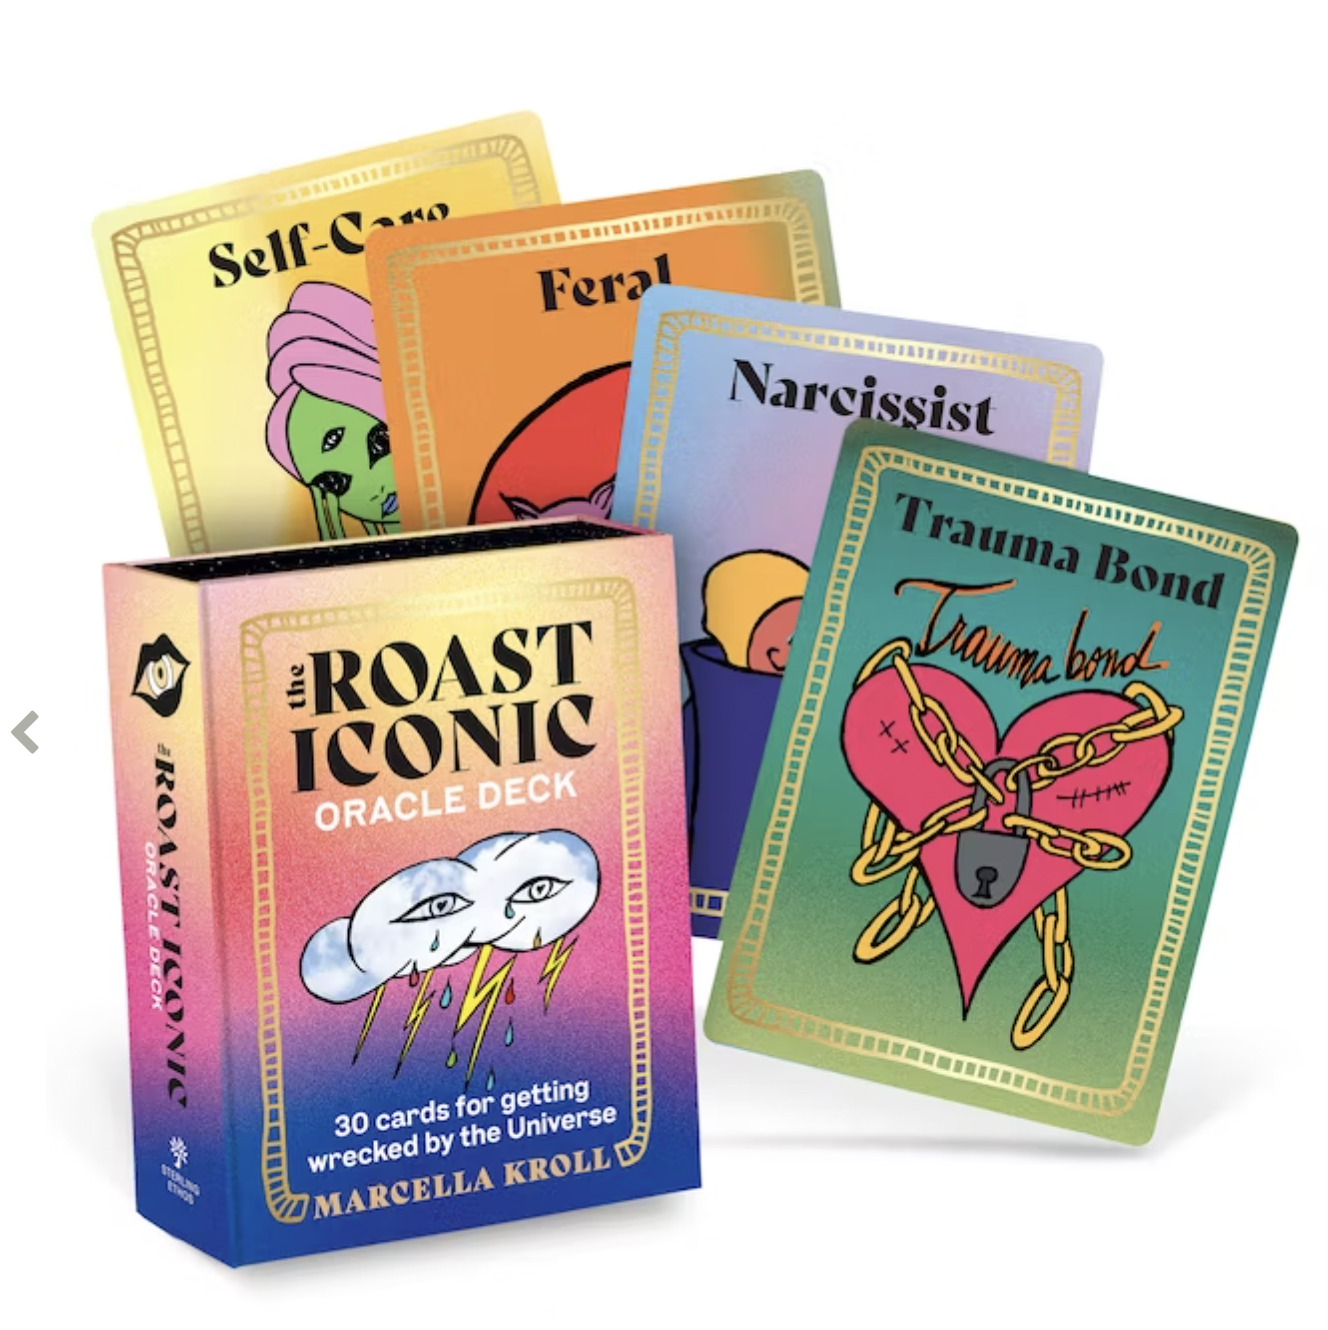 The Roast Iconic Oracle Deck: 30 Cards for Getting Wrecked by the Universe by Marcella Kroll